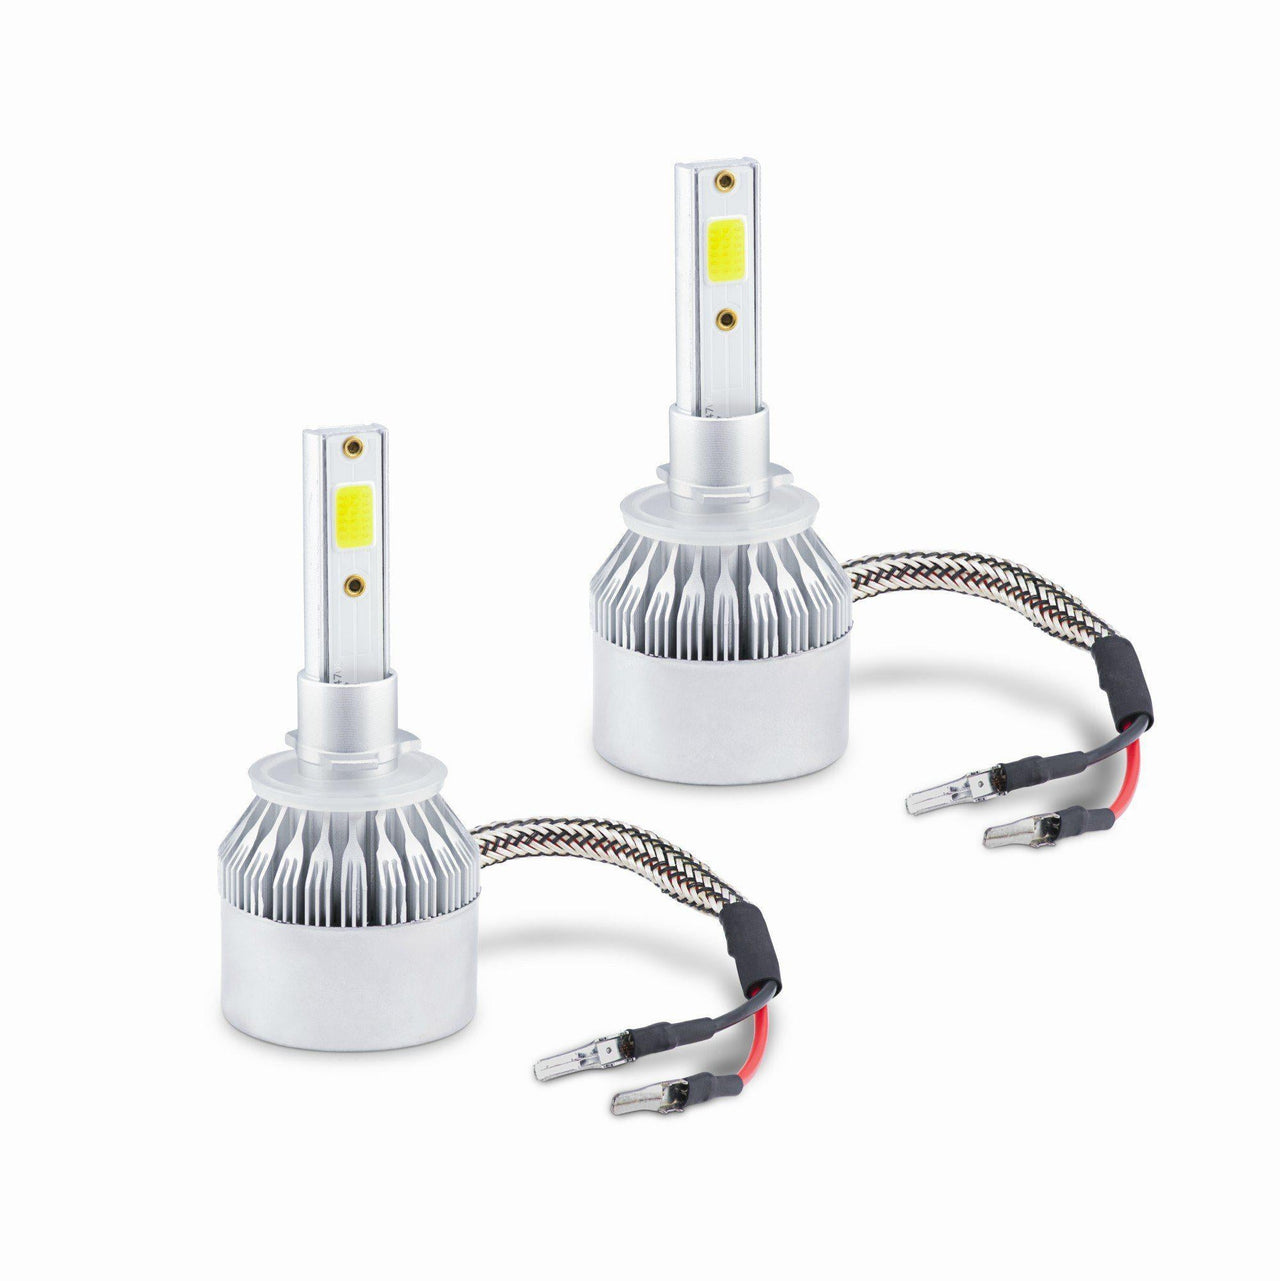 891 LED Headlight Conversion Kit also known as 891 H33